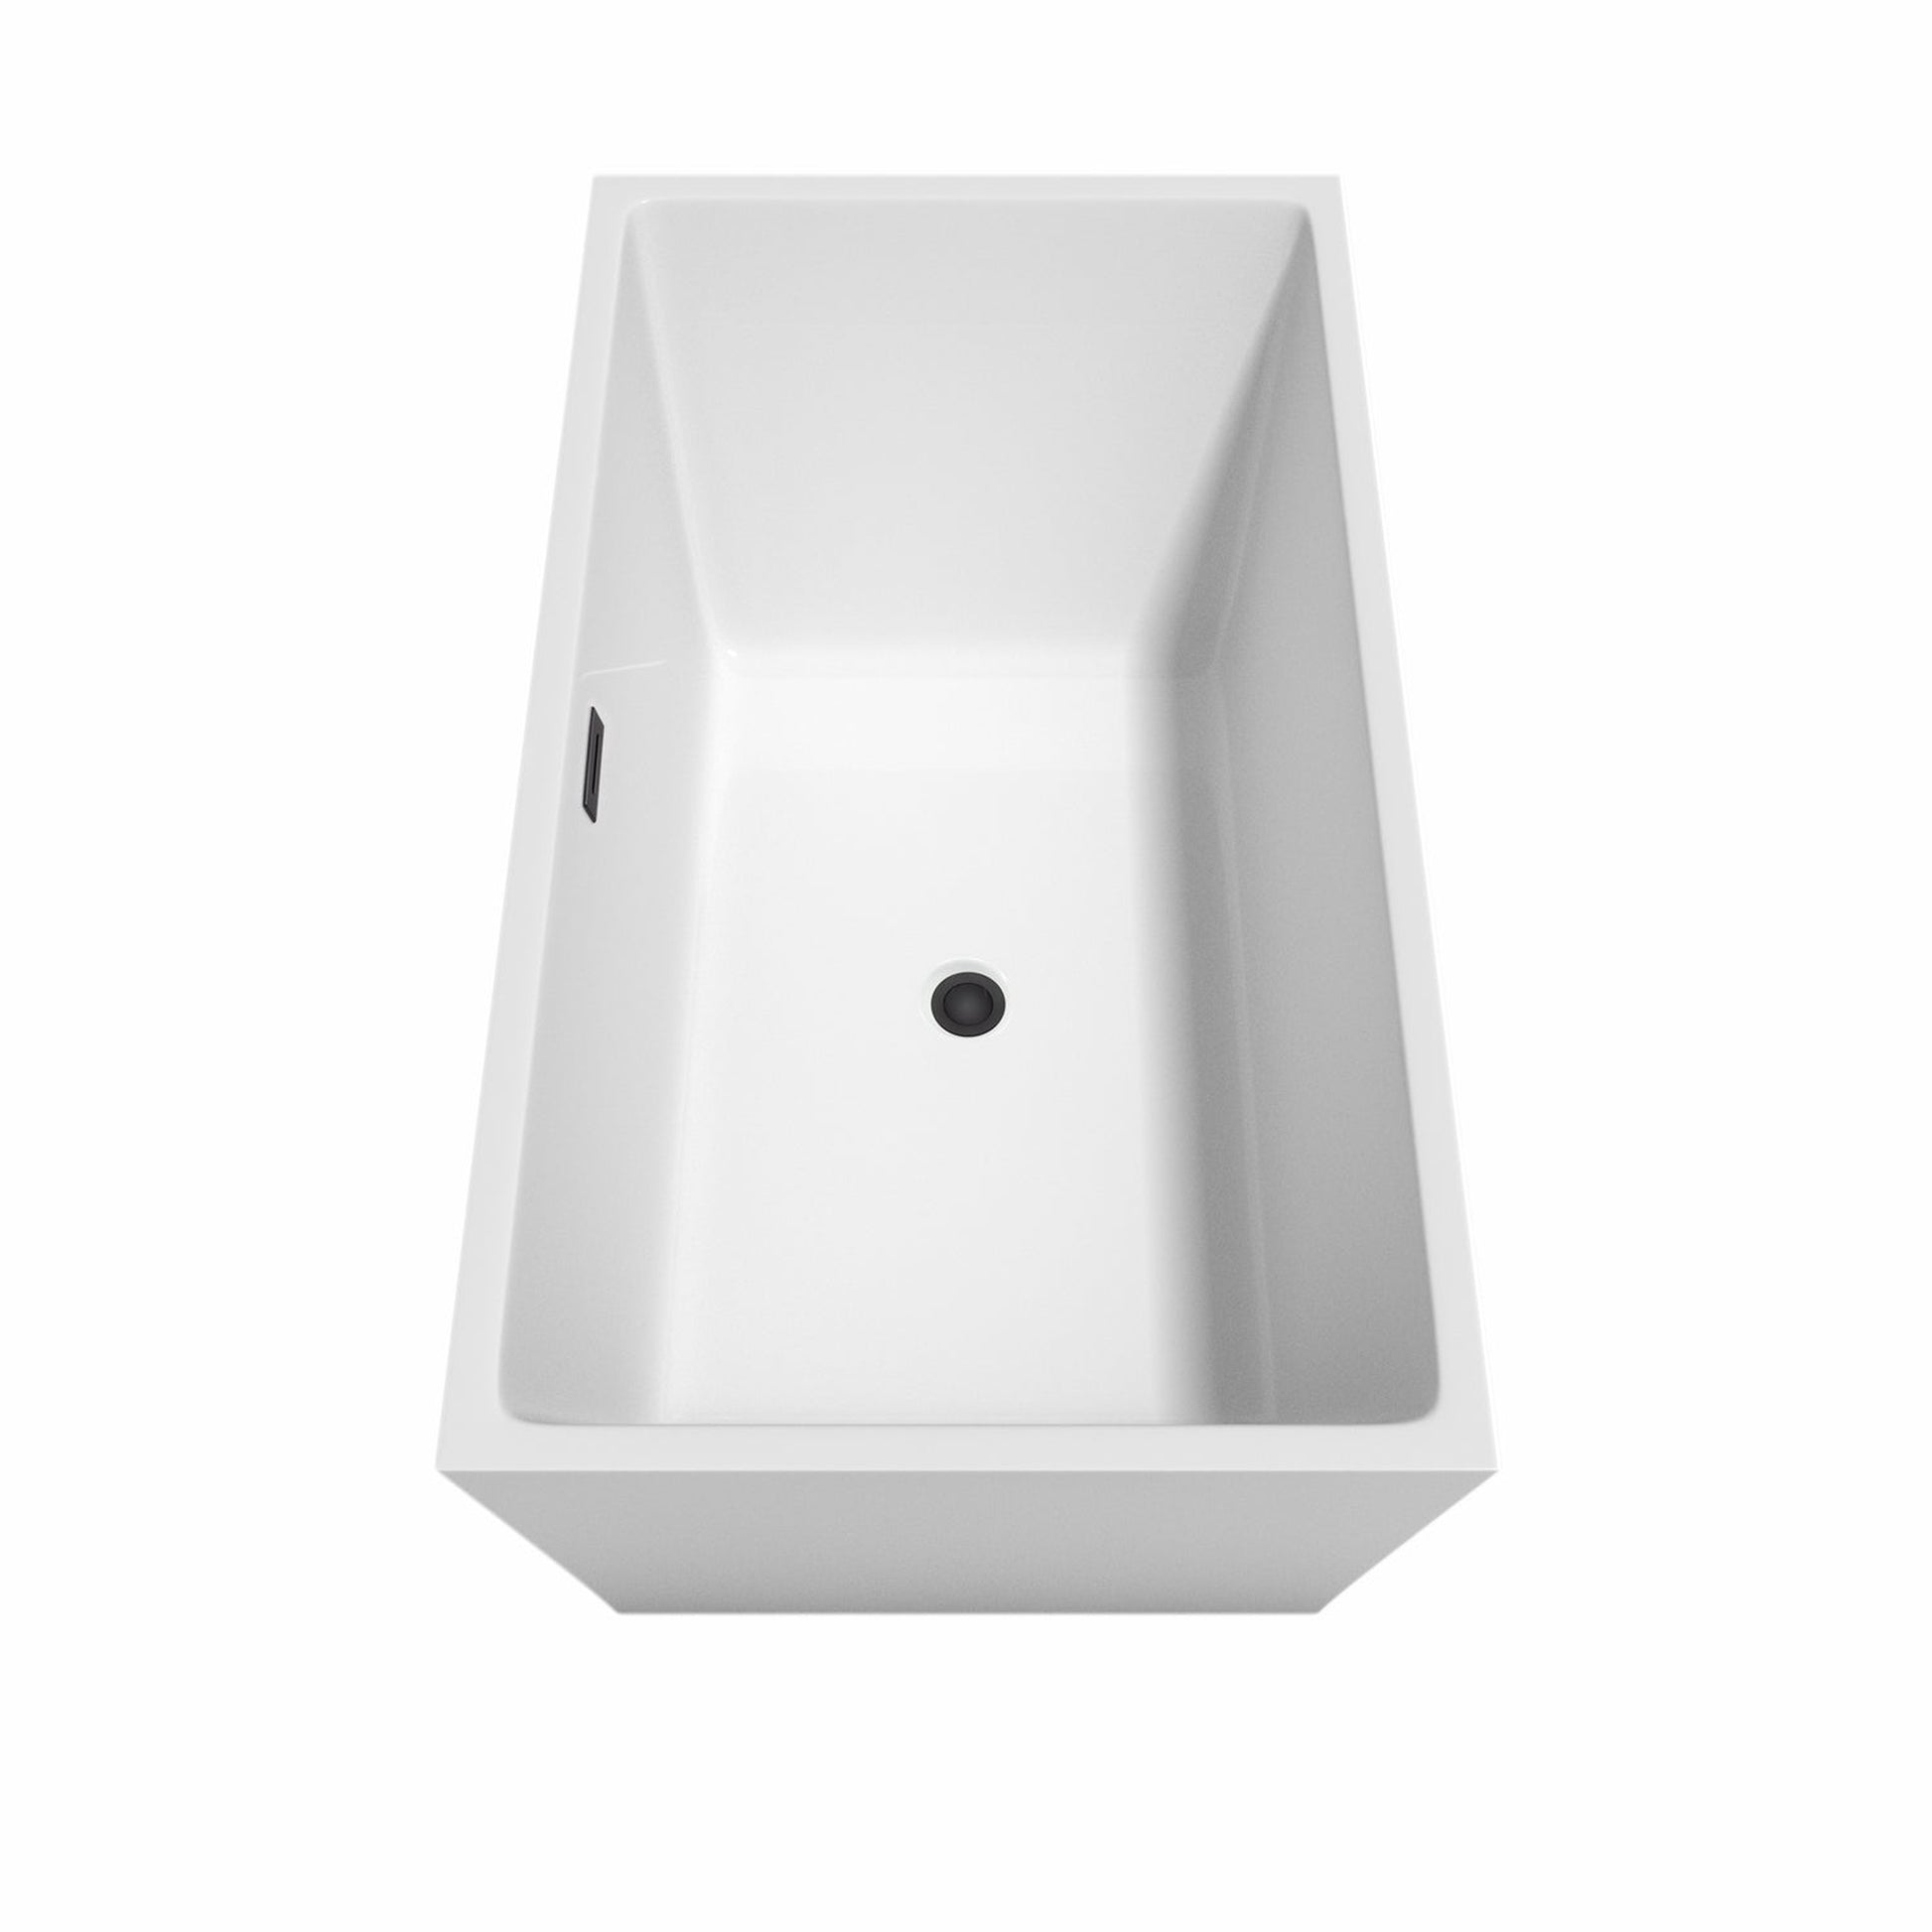 Wyndham Collection Sara 59" Freestanding Bathtub in White With Floor Mounted Faucet, Drain and Overflow Trim in Matte Black